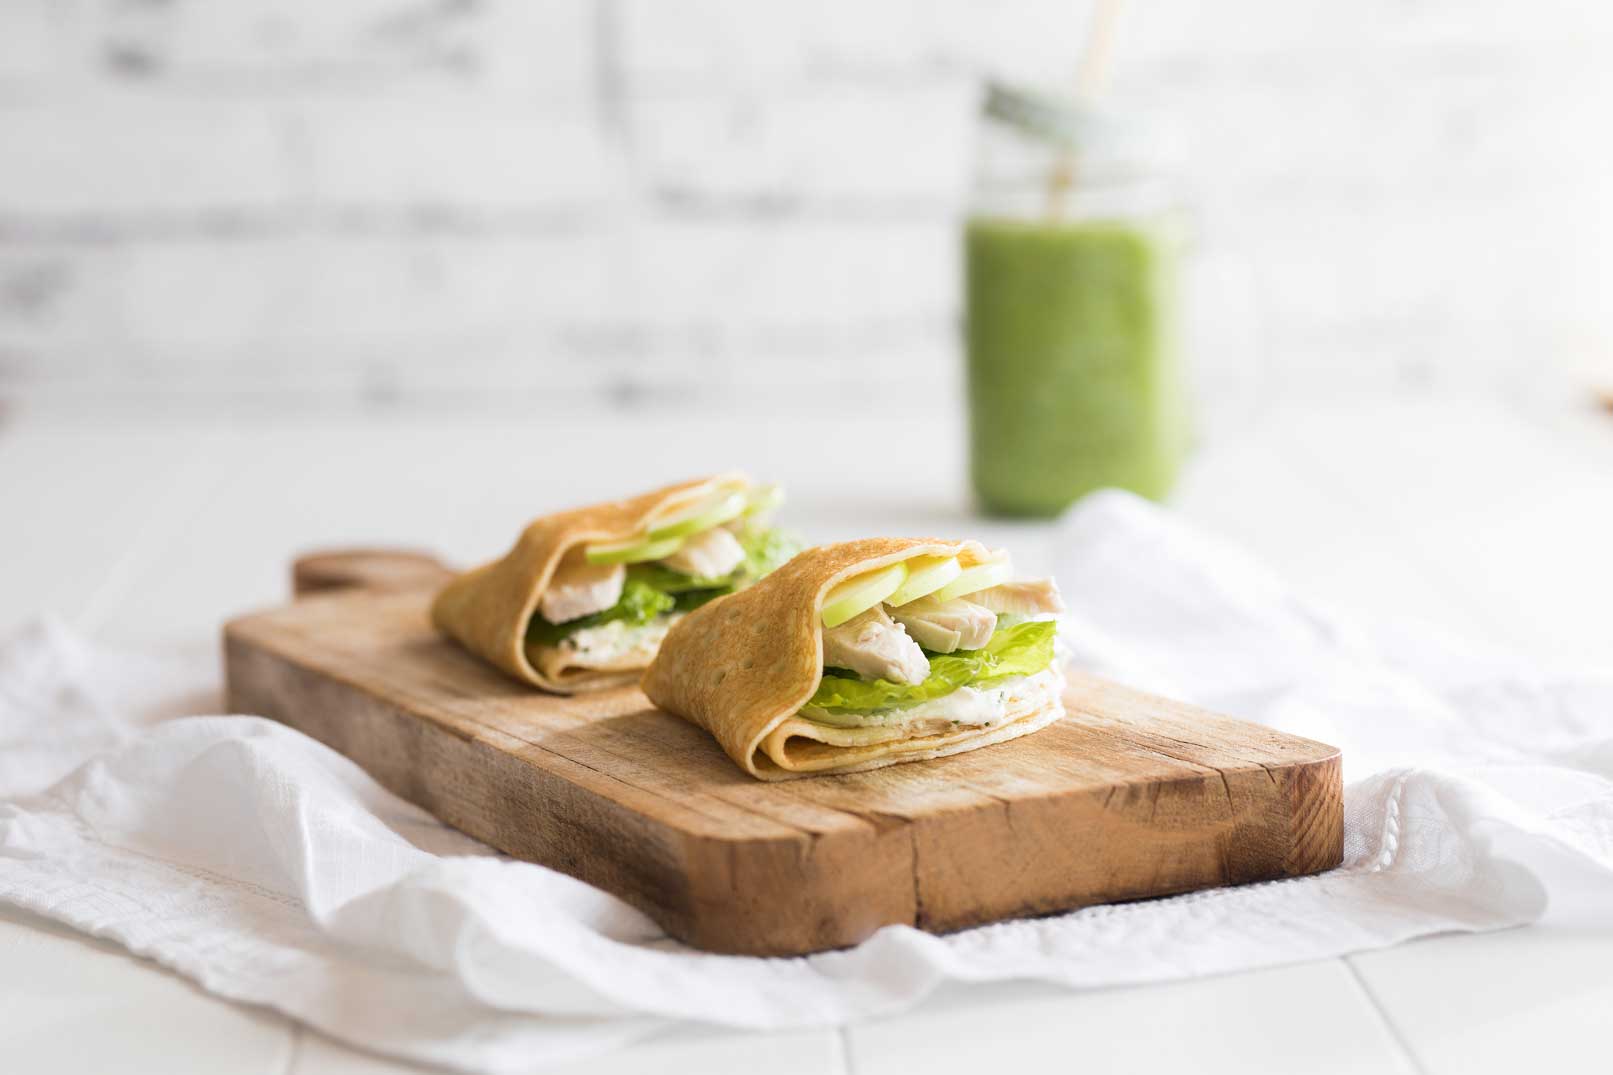 Two turkey, apple and avocado crepes on a wooden serving board sitting on white cloth napkin with a green smoothie in a glass jar in the background.